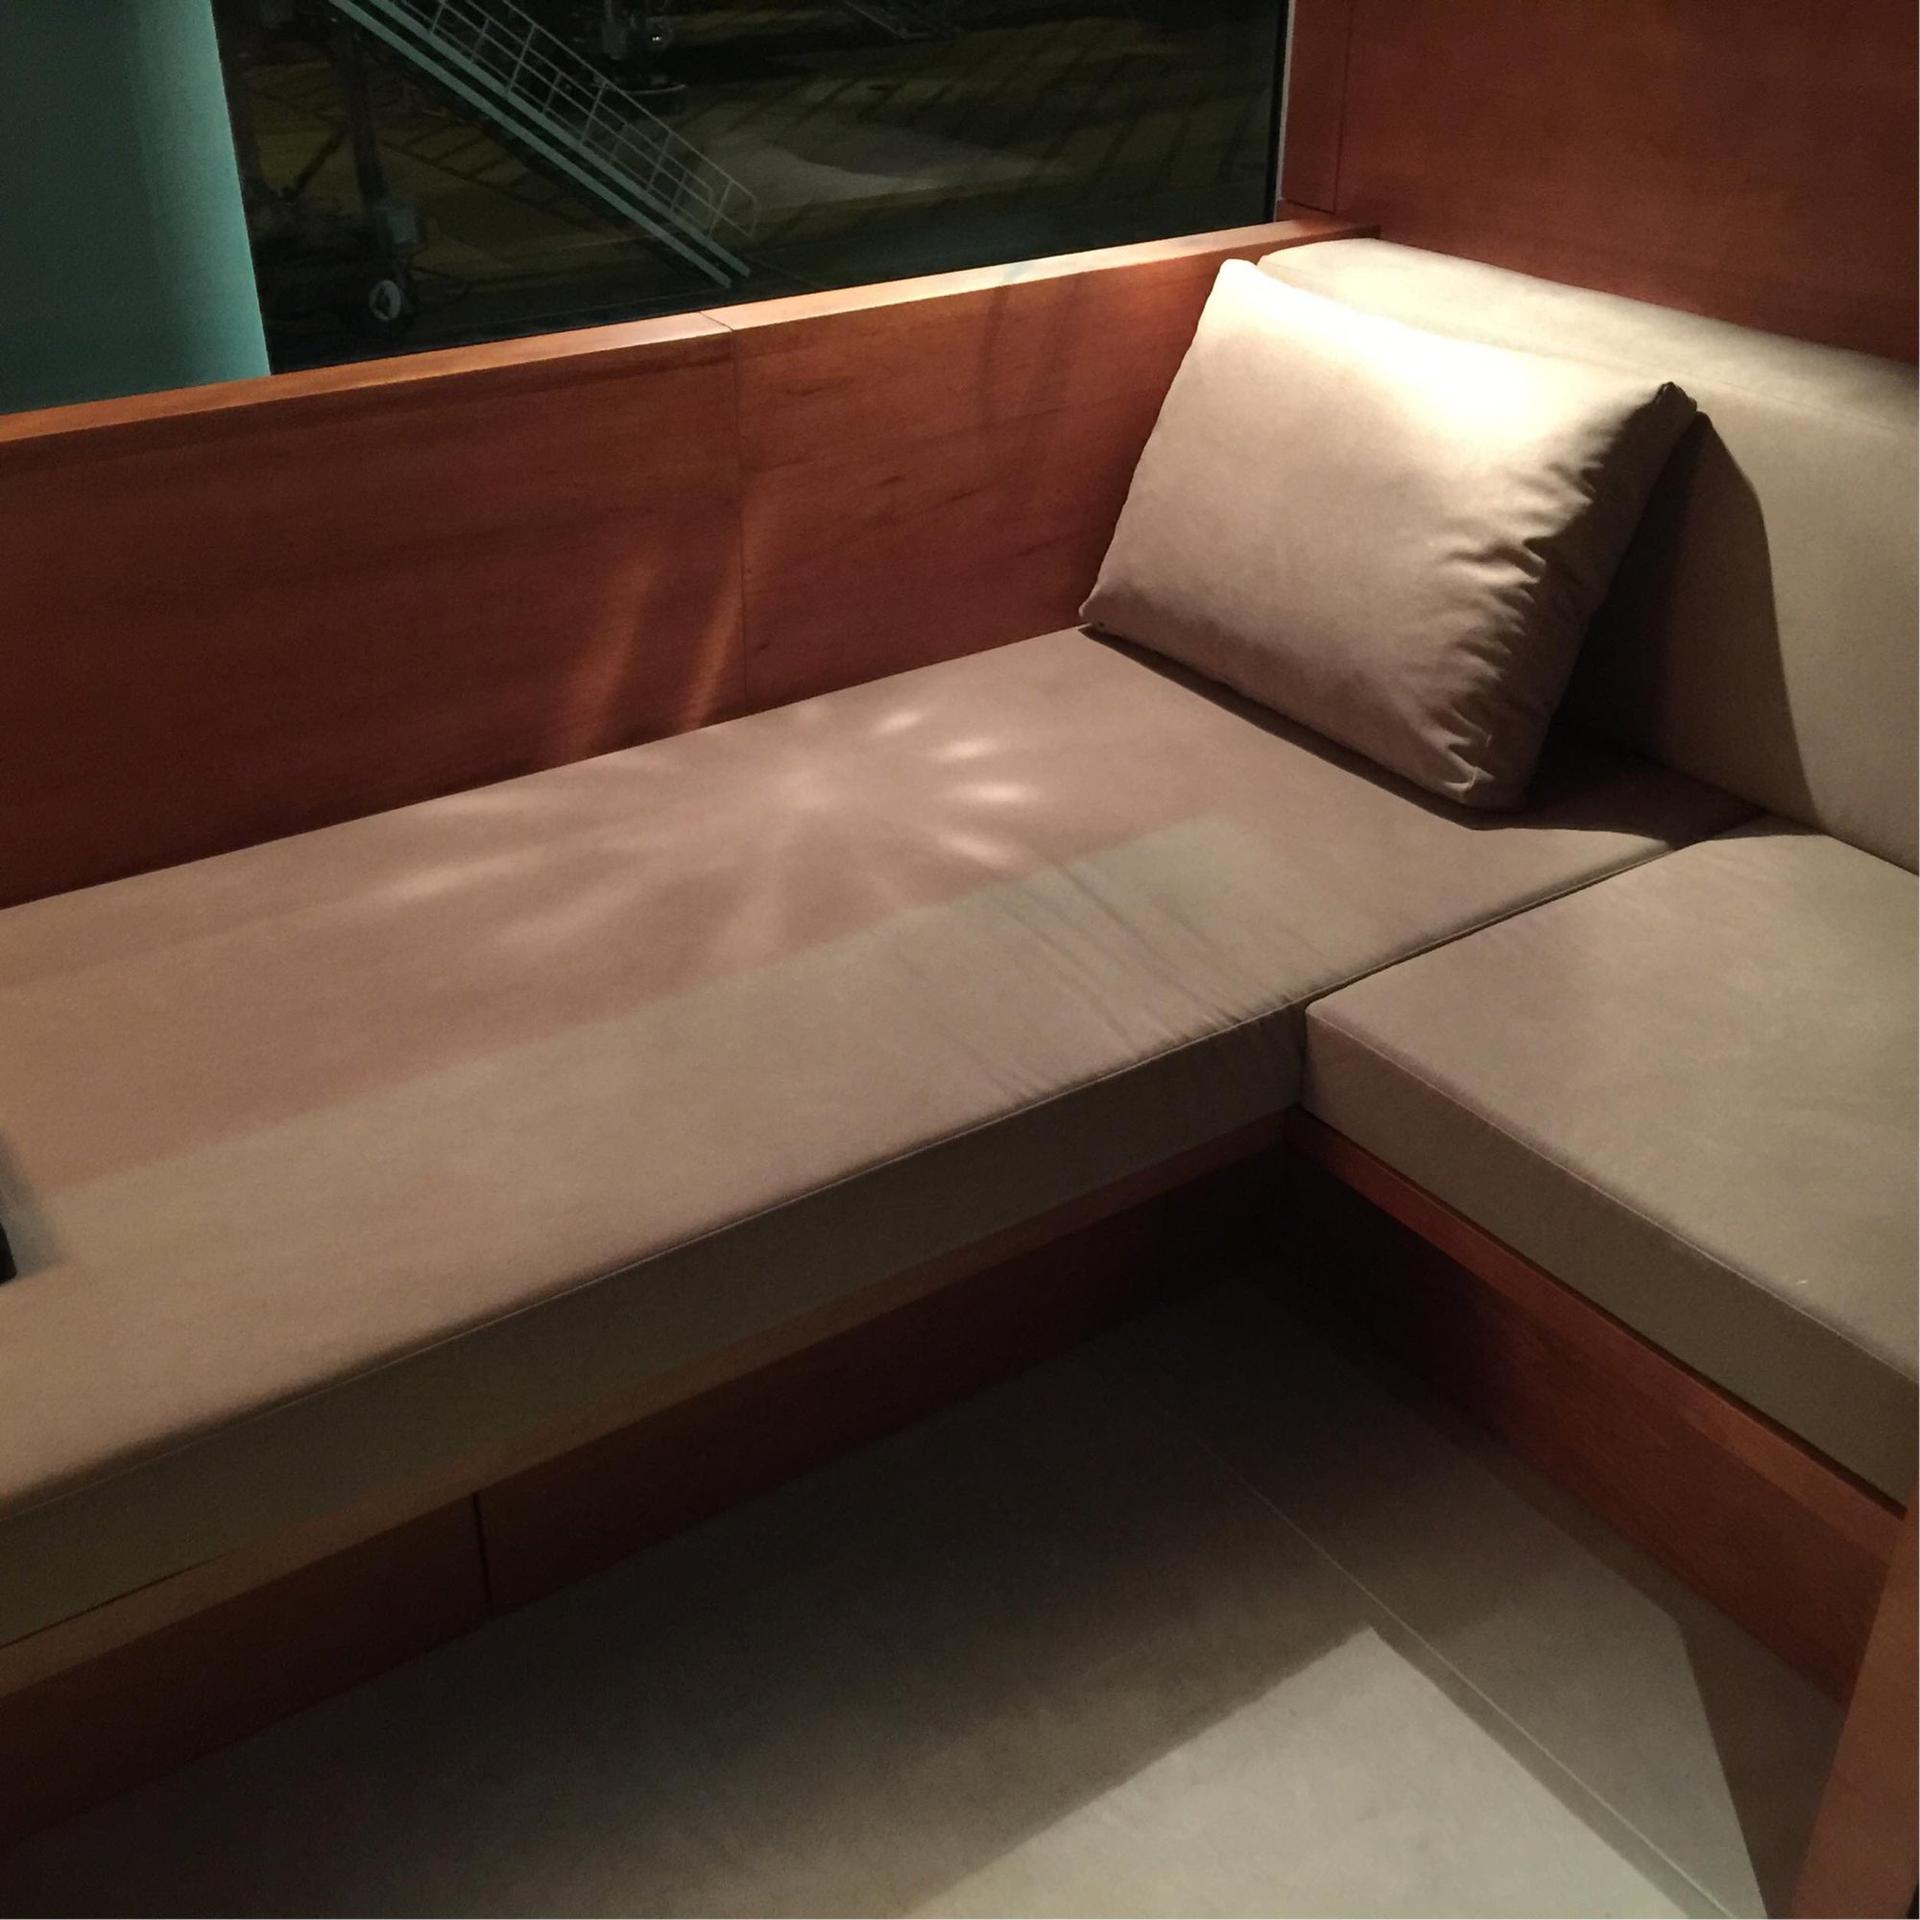 Cathay Pacific The Pier First Class Lounge image 21 of 100